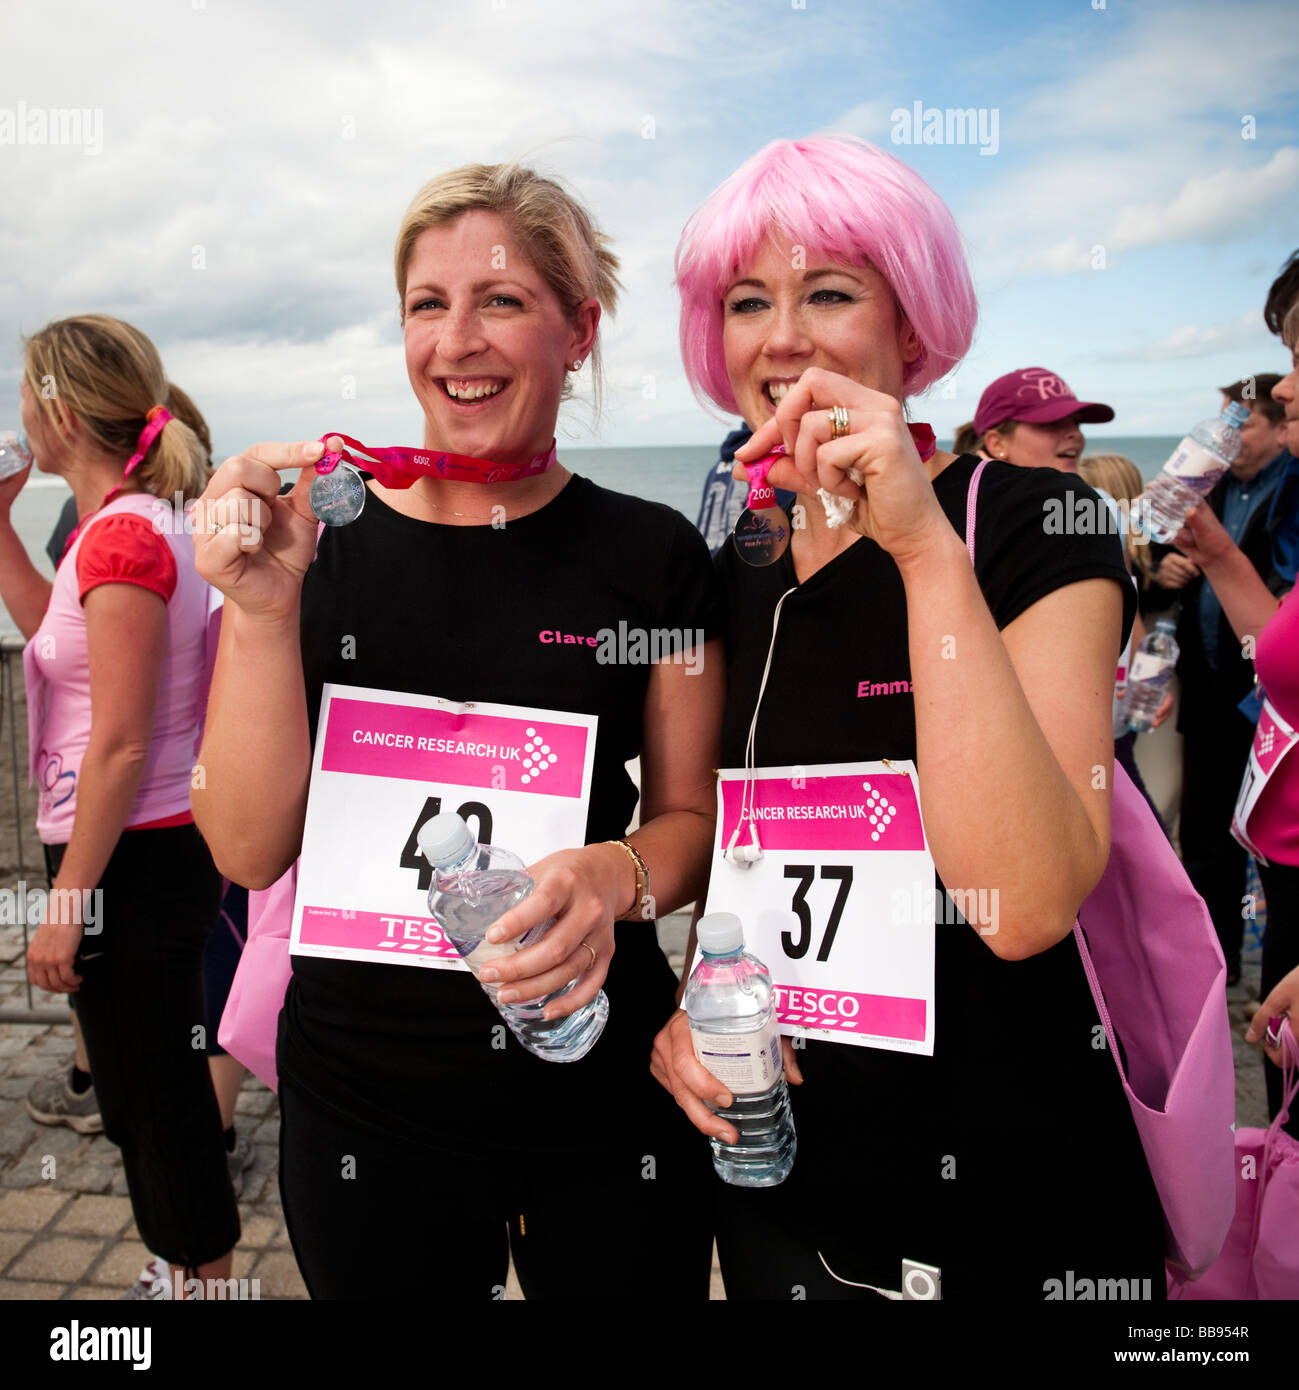 two Women competing in the Race For Life sponsored run to raise money for cancer research Aberystwyth Wales UK May 2009 Stock Photo